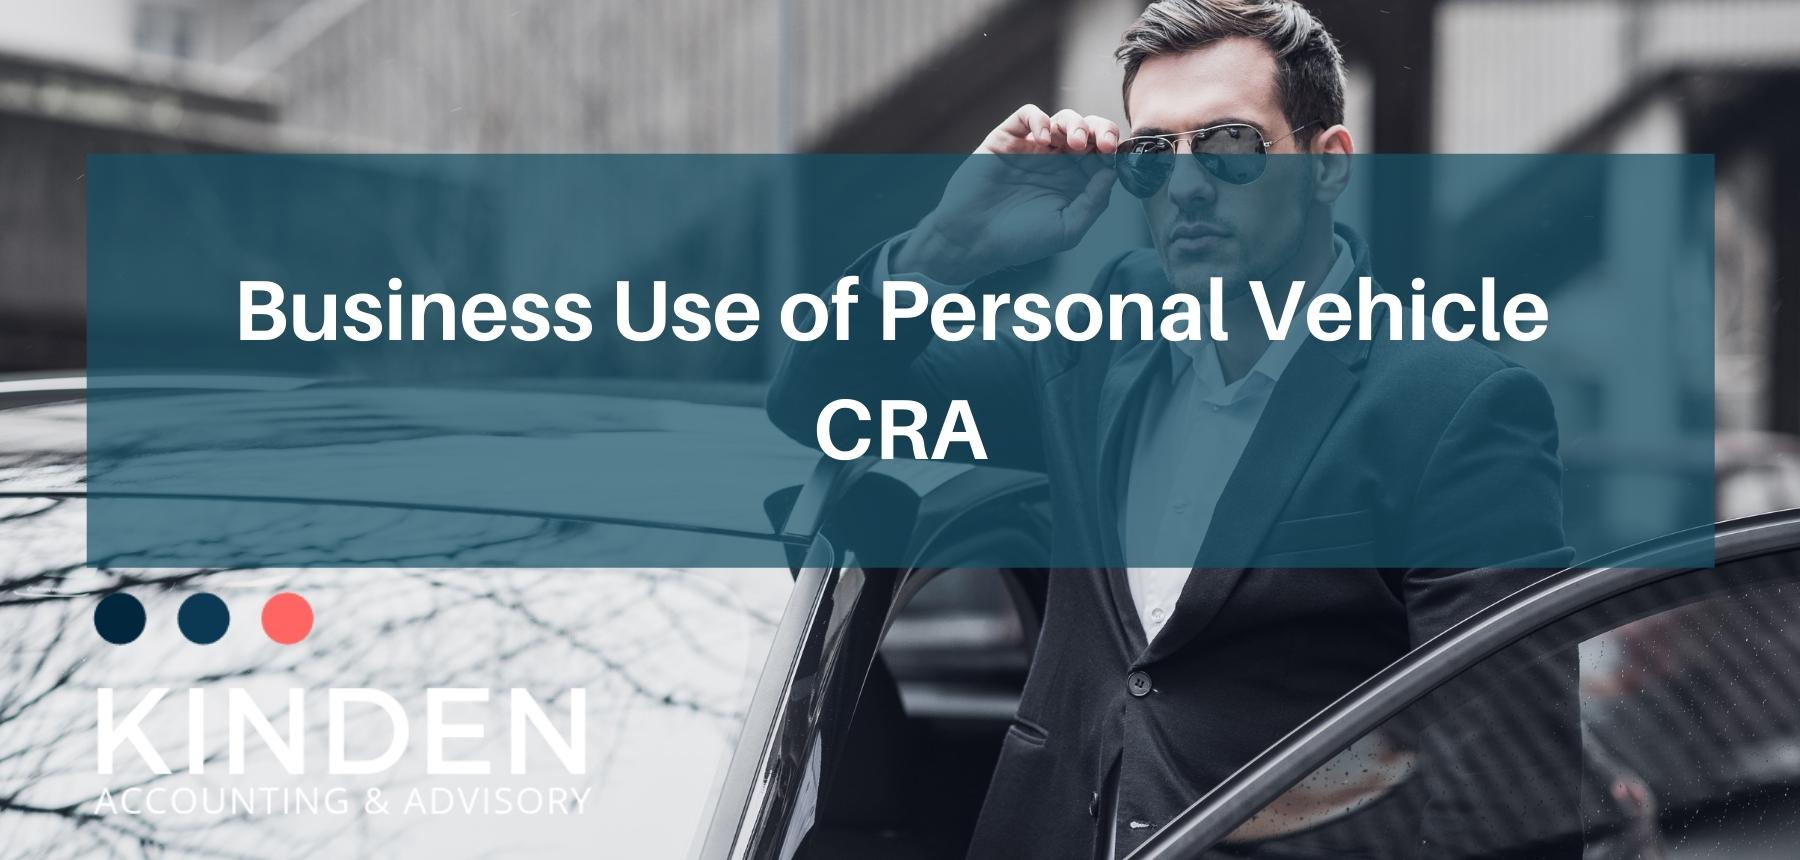 Business Use of Personal Vehicle CRA